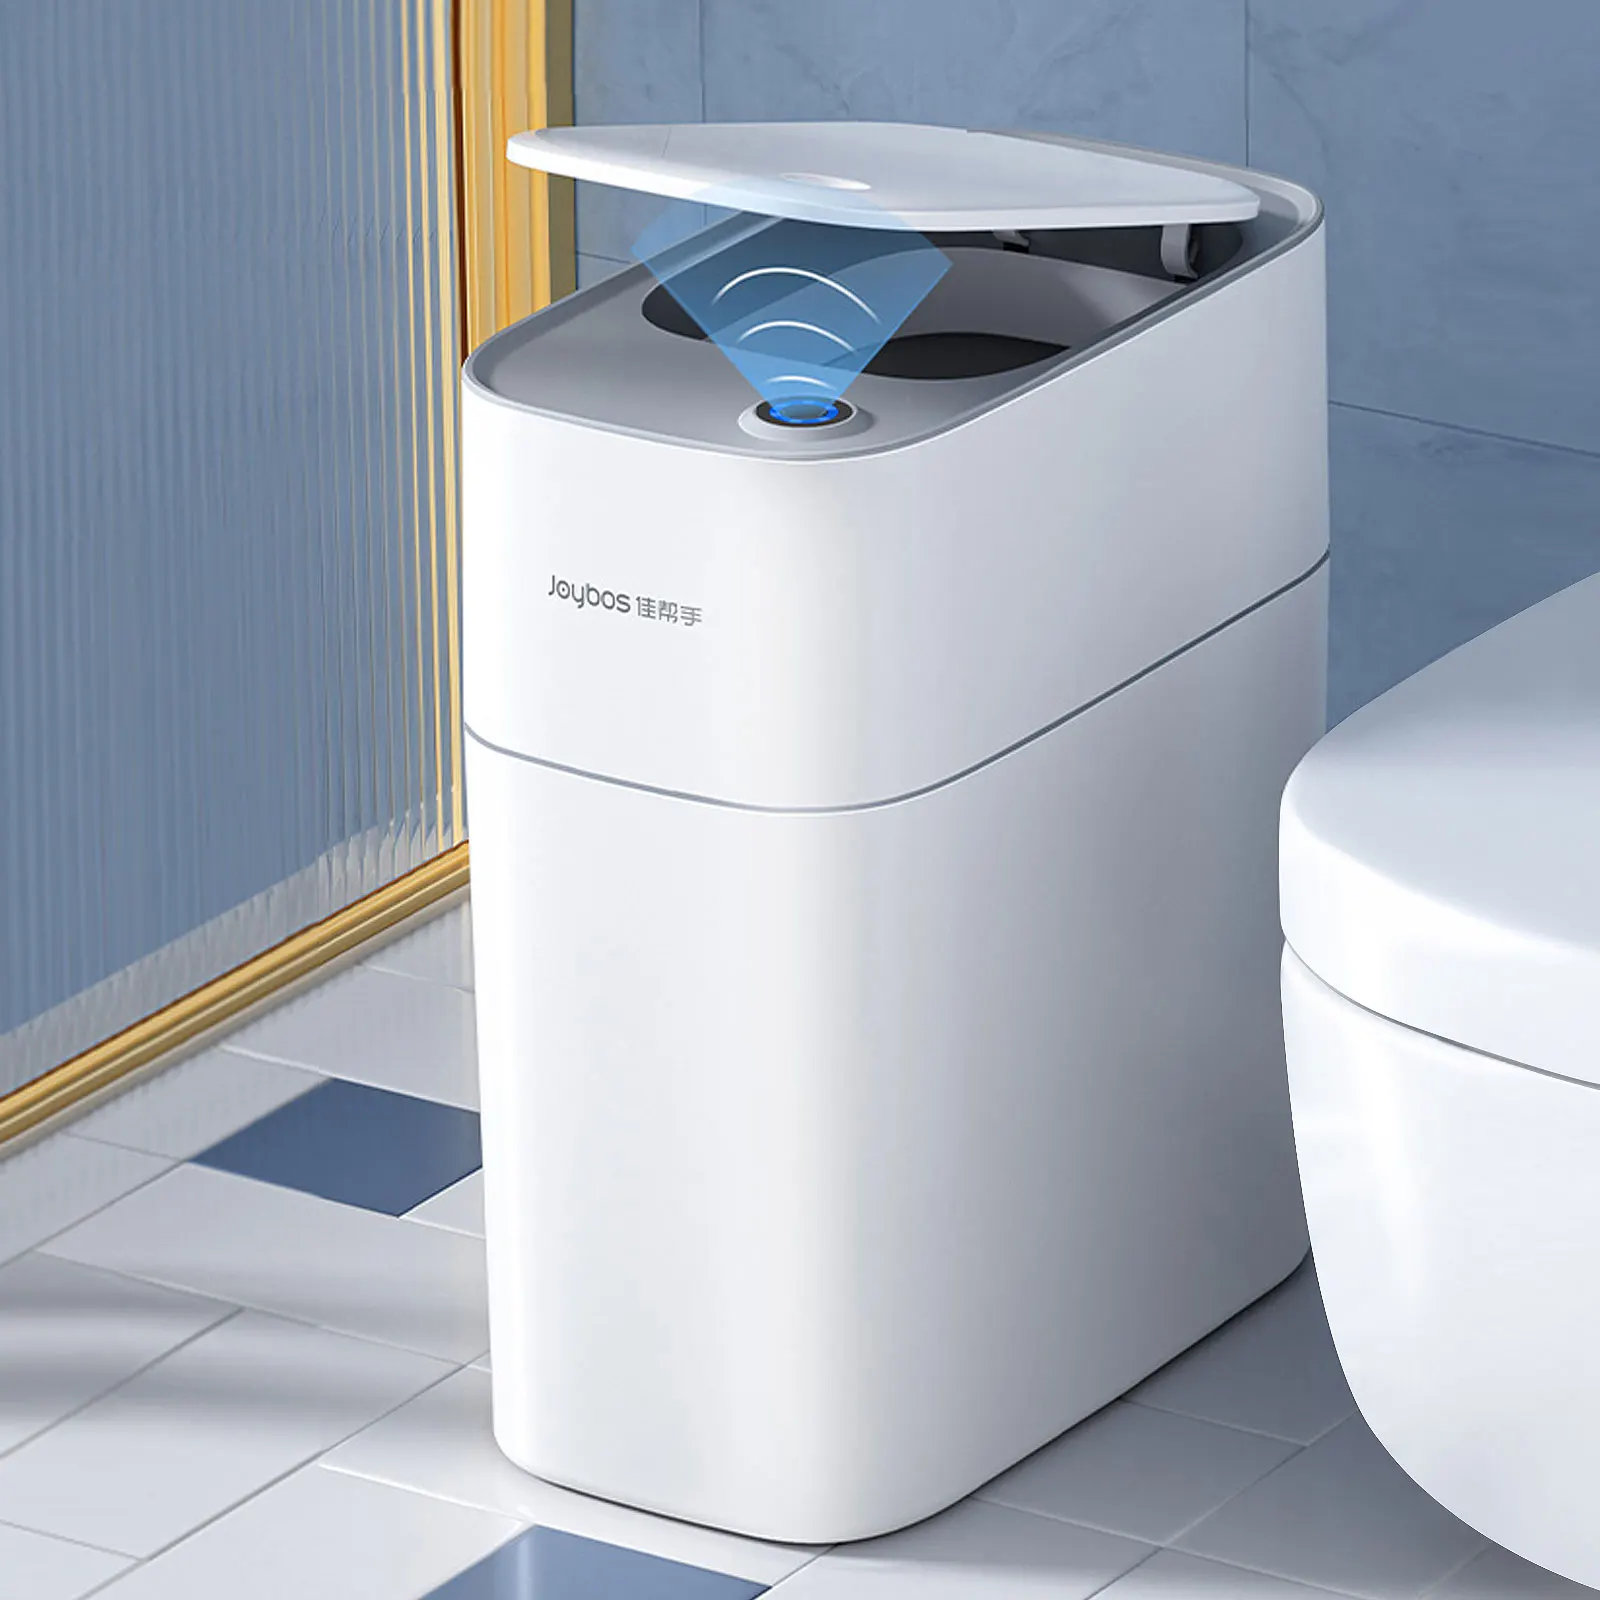 14L Bathroom Automatic Sensor Trash Can Smart Home,Automatic Bagging Smart Garbage Bin For Home Toilet Kitchen